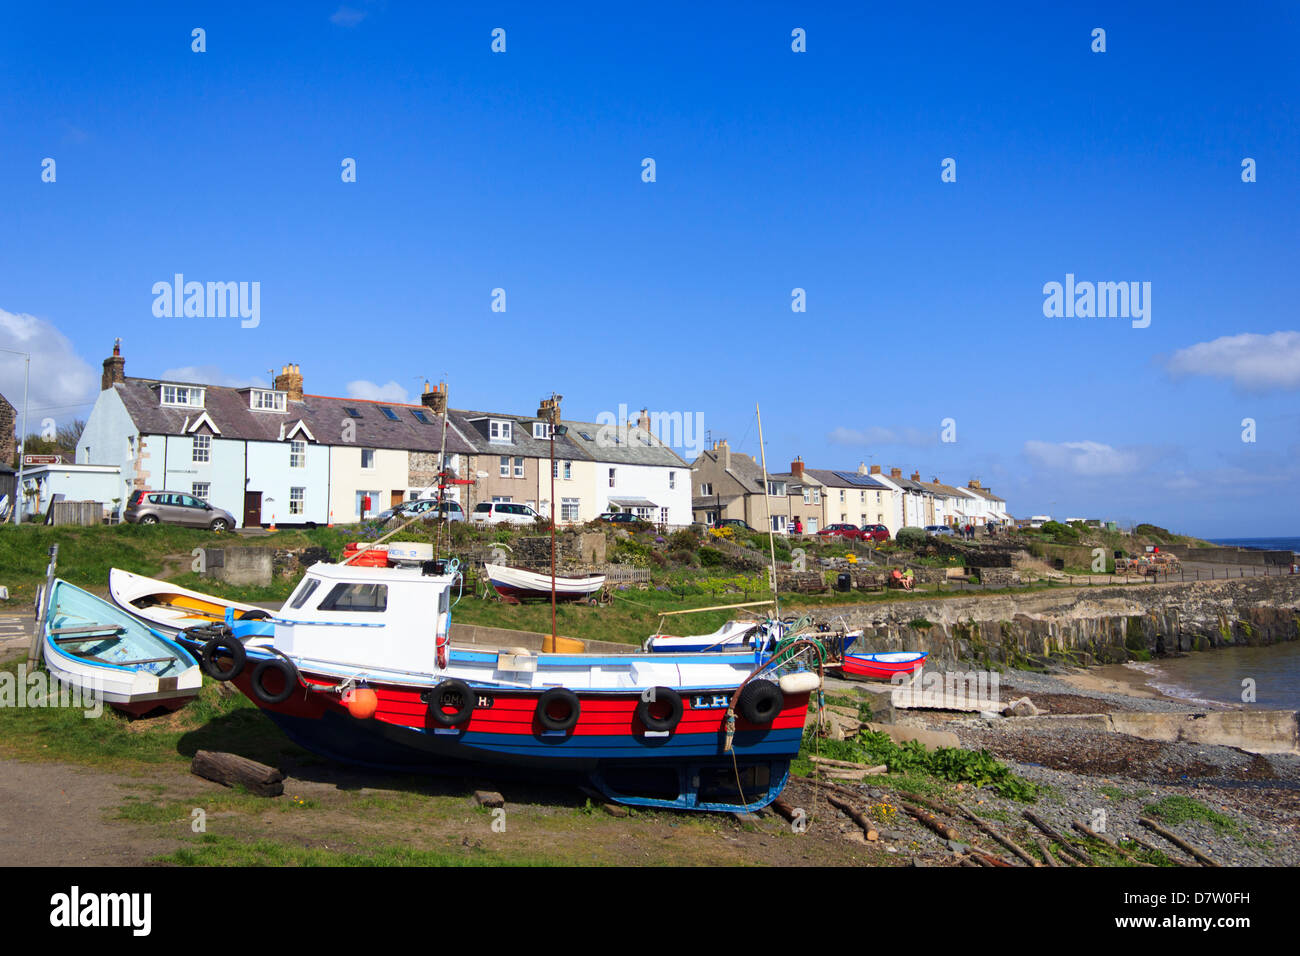 Craster Village, which is famous for its Craster Kippers near North East of England. Stock Photo